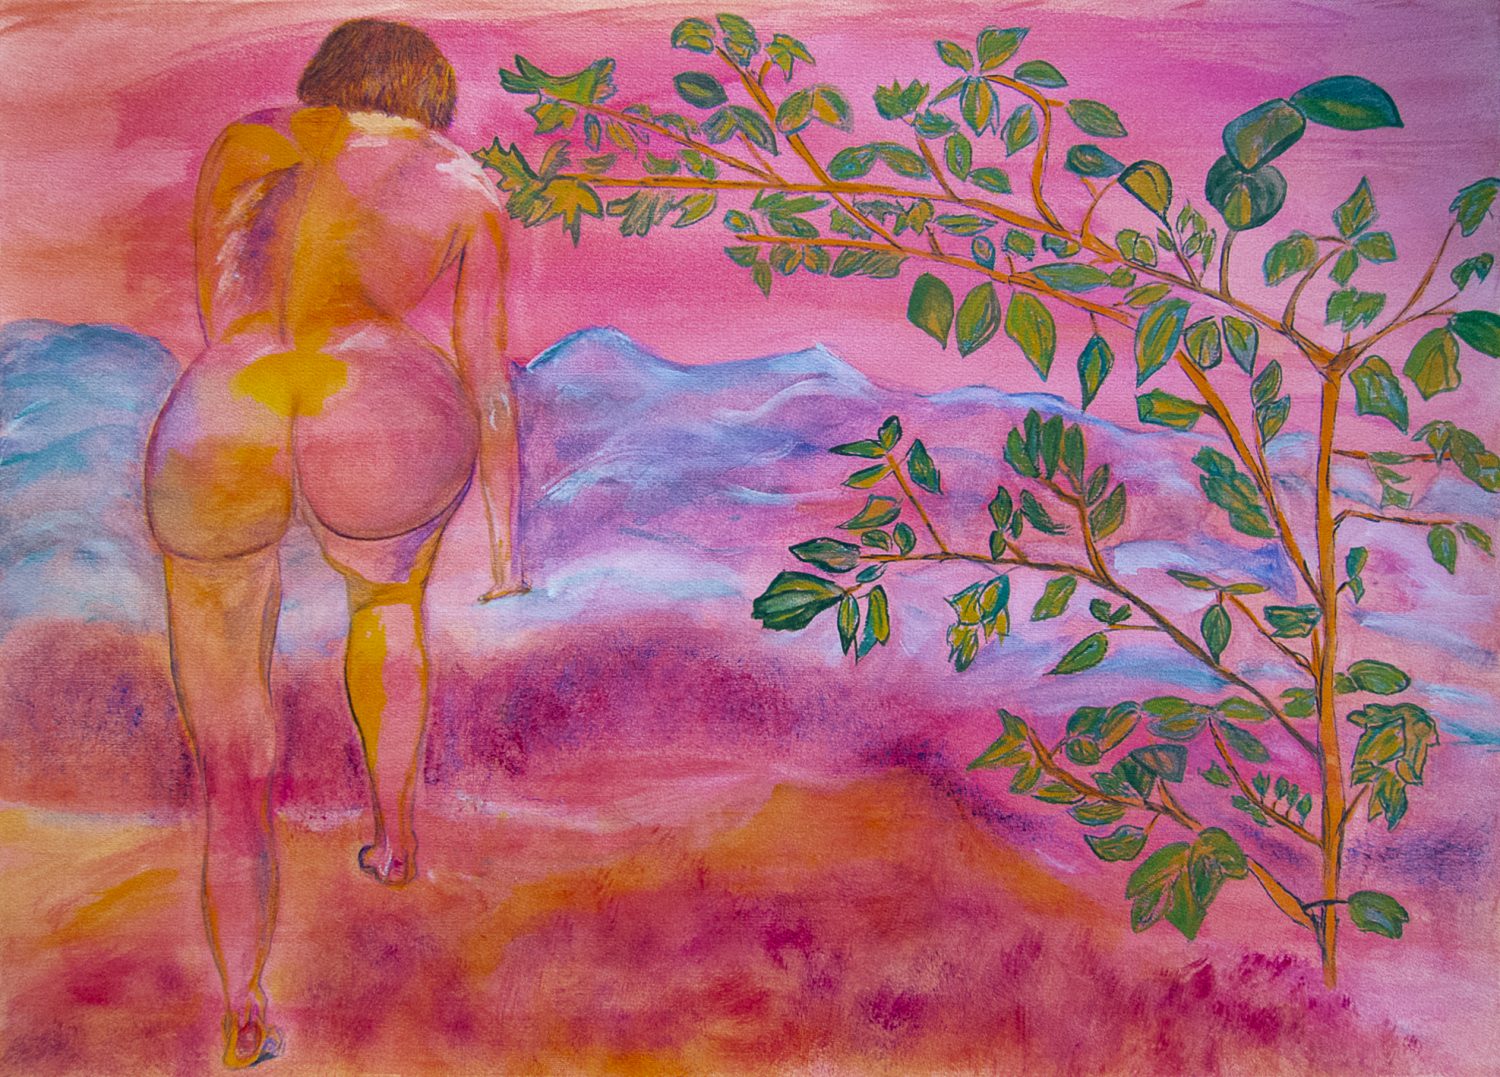 Pink Paining of a Woman going into Waves with a Tree to her Side